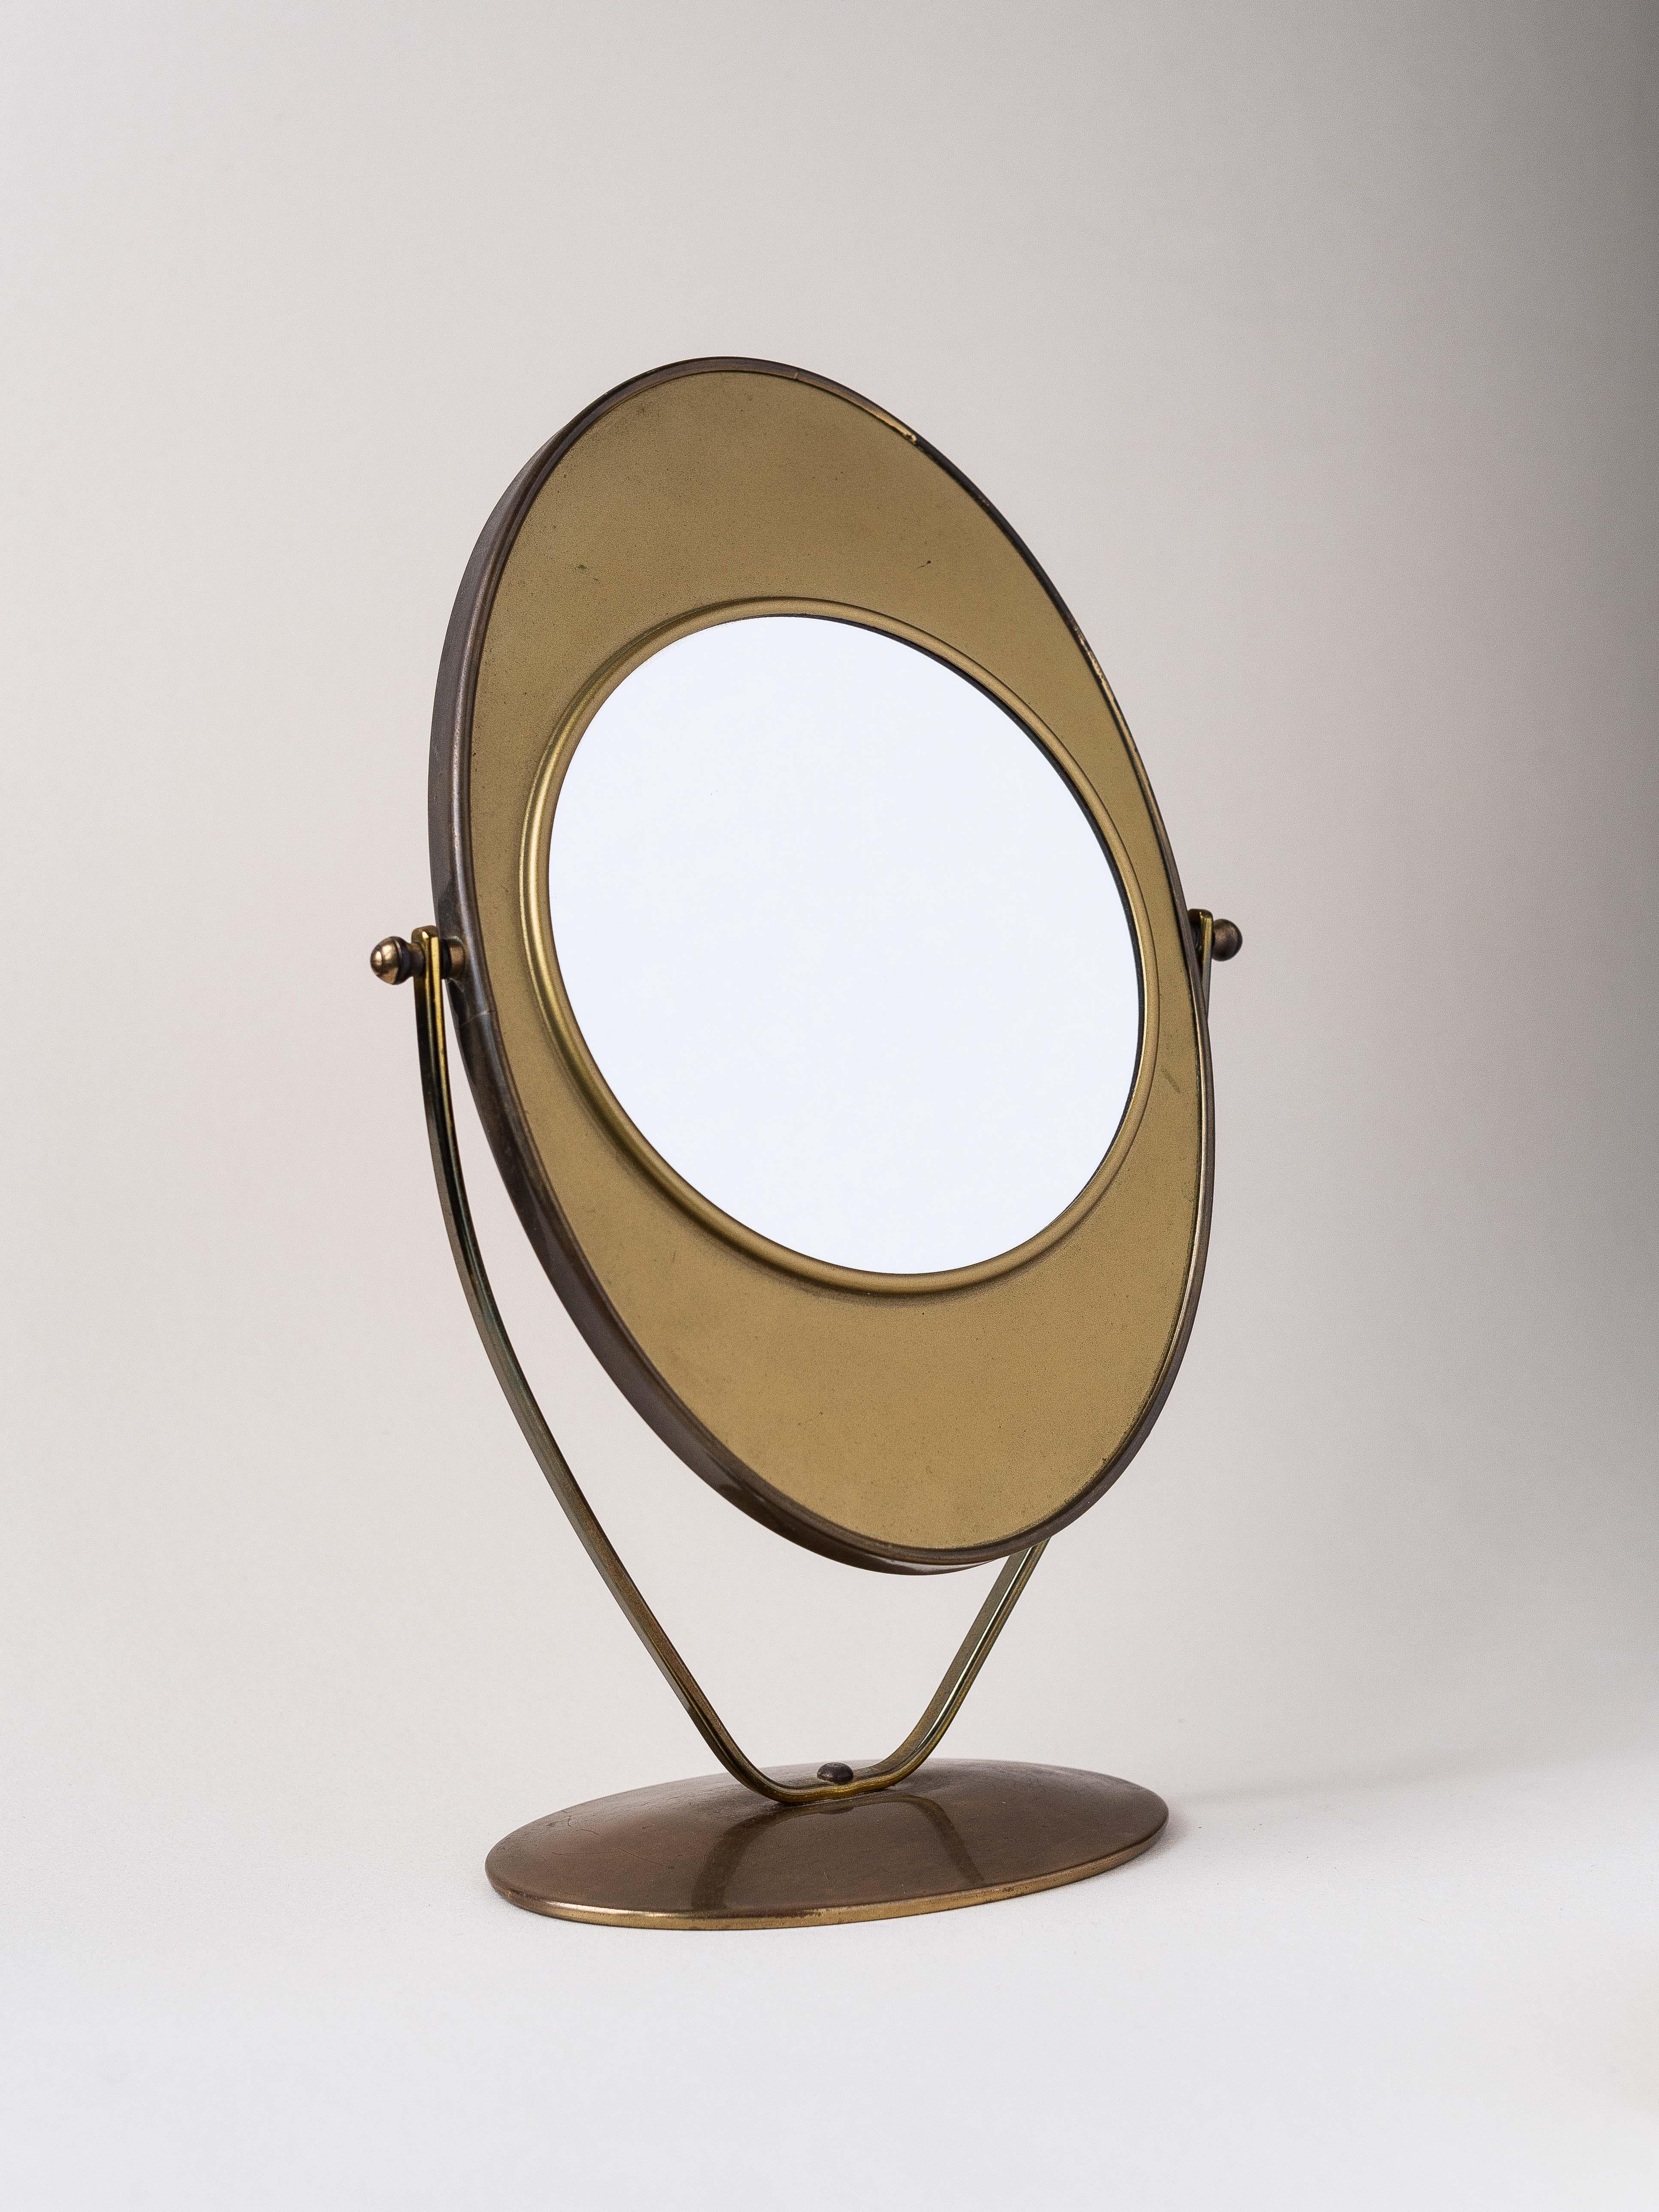 Elegant double sided table mirror, Circa 1960.

Entirely made of patinated brass, overall shape in the style of Charles Hollis Jones.

The mirror can be flipped to be used on either side.

One side is a large classic mirror, the other side is a